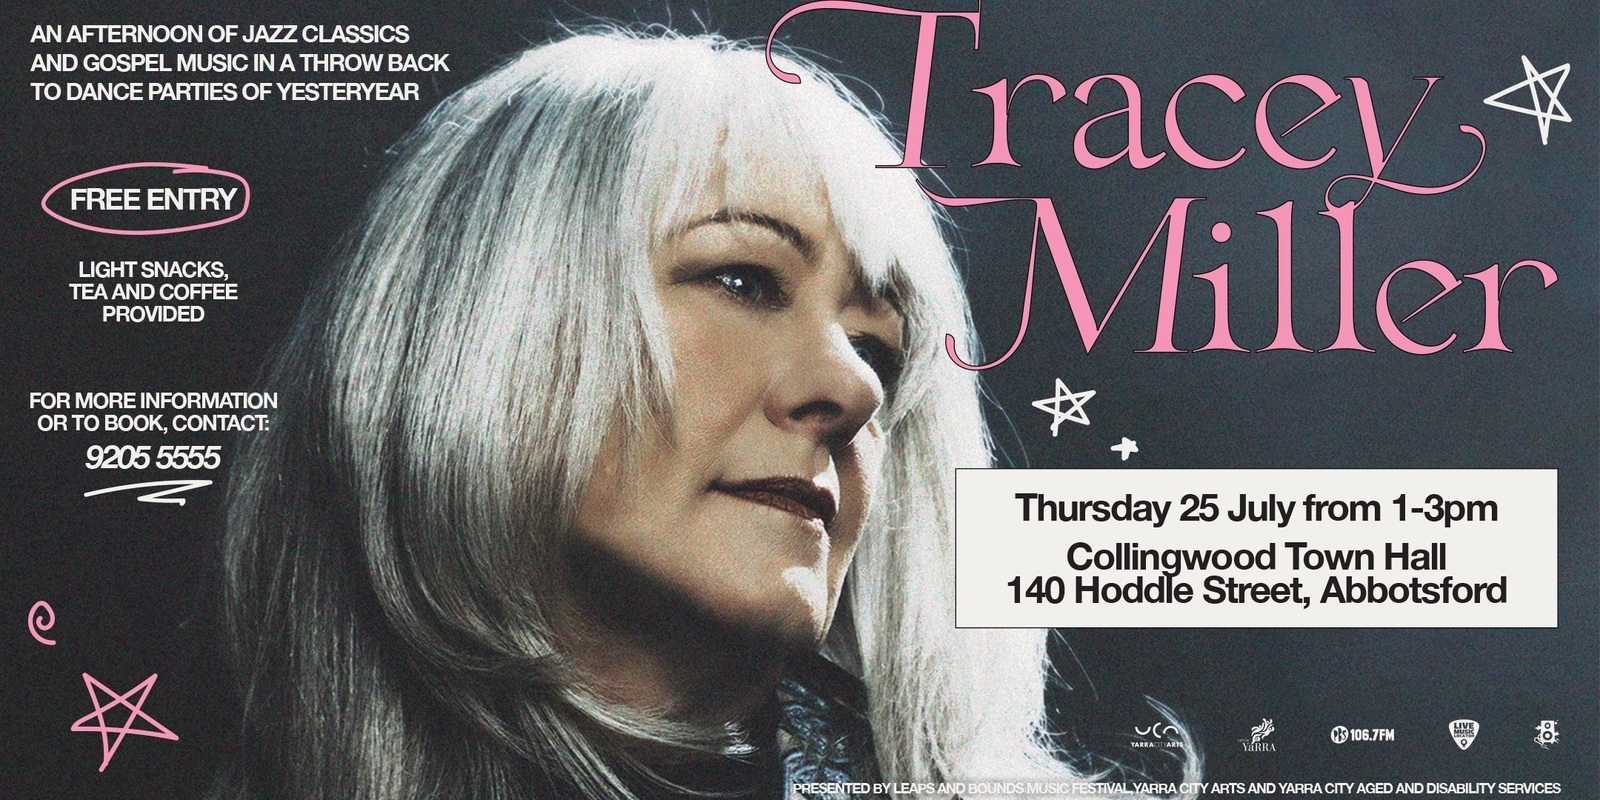 Banner image for An afternoon of Jazz classics and gospel music with Tracey Miller